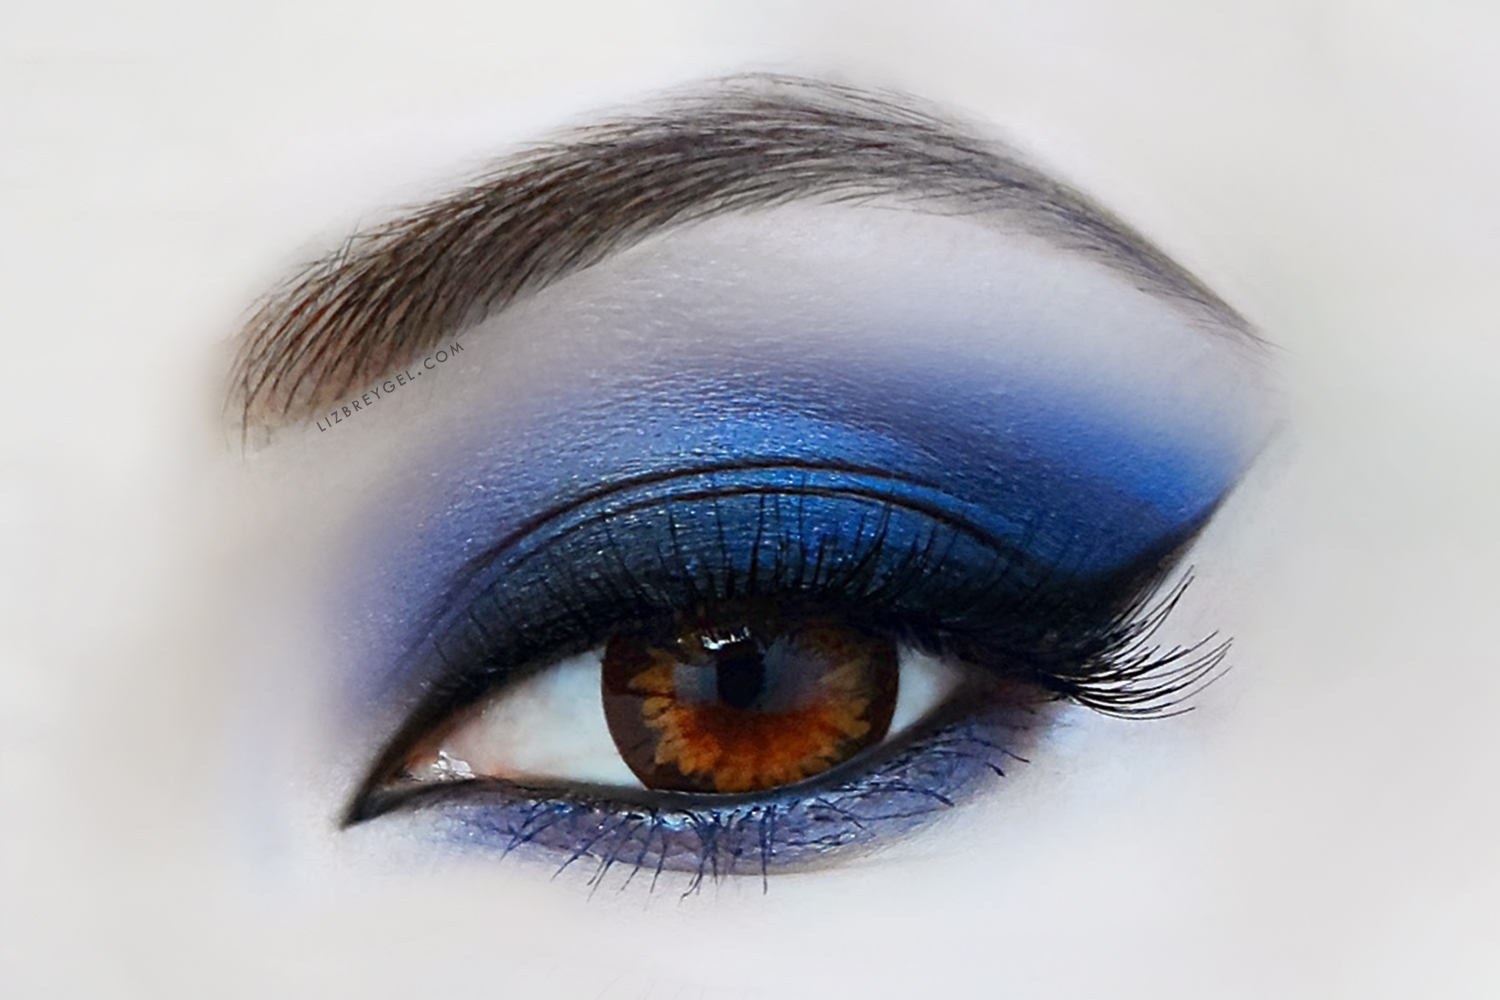 a close-up picture of an eye with dramatic makeup look